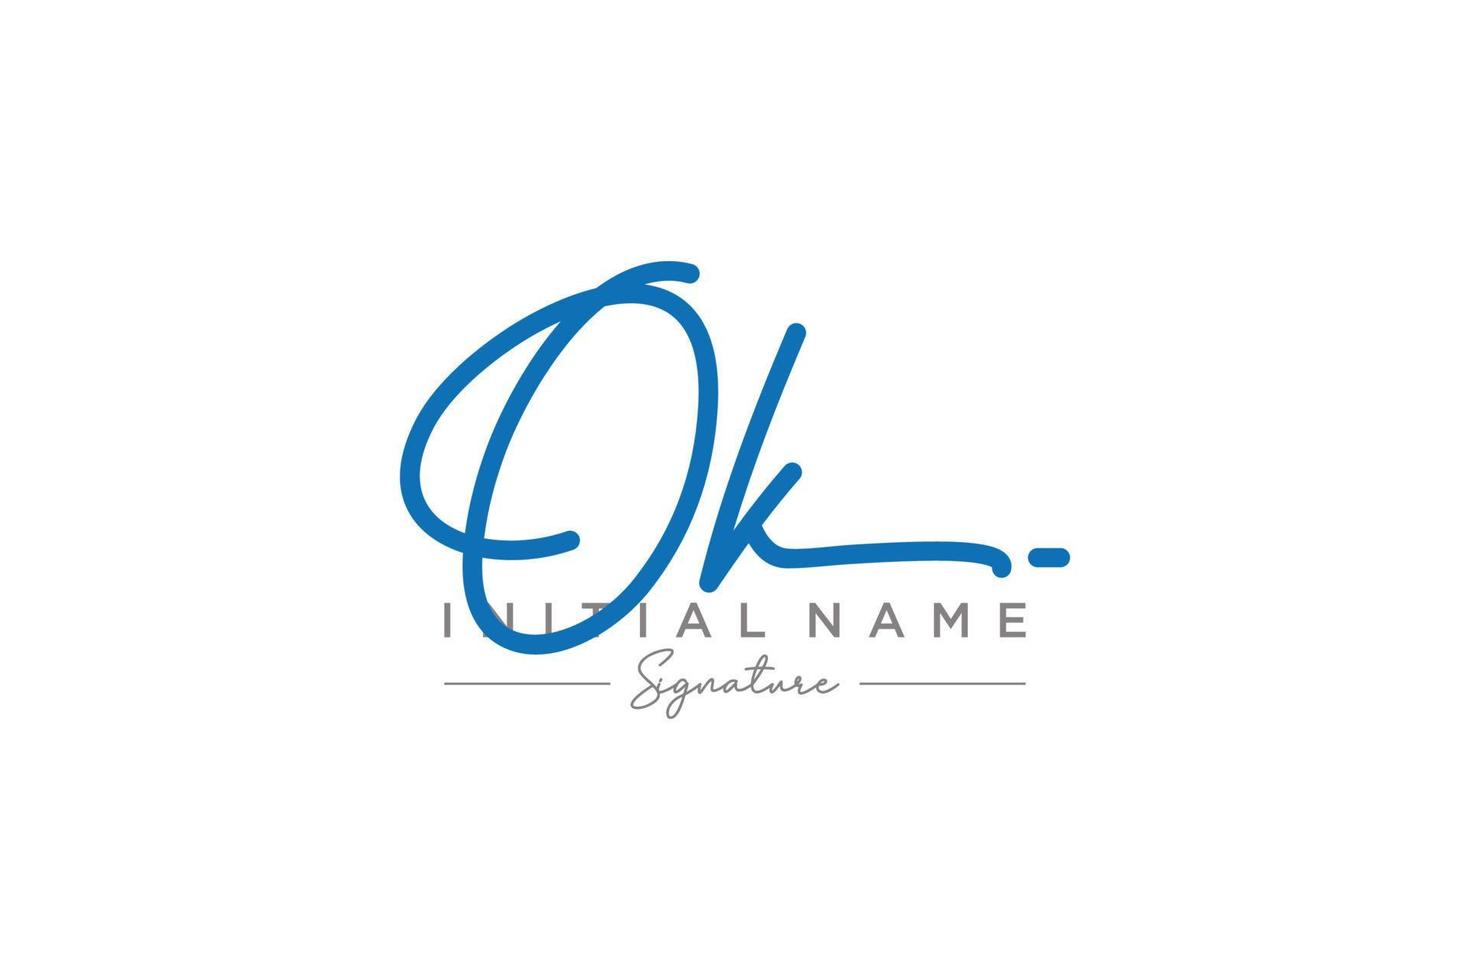 Initial OK signature logo template vector. Hand drawn Calligraphy lettering Vector illustration.